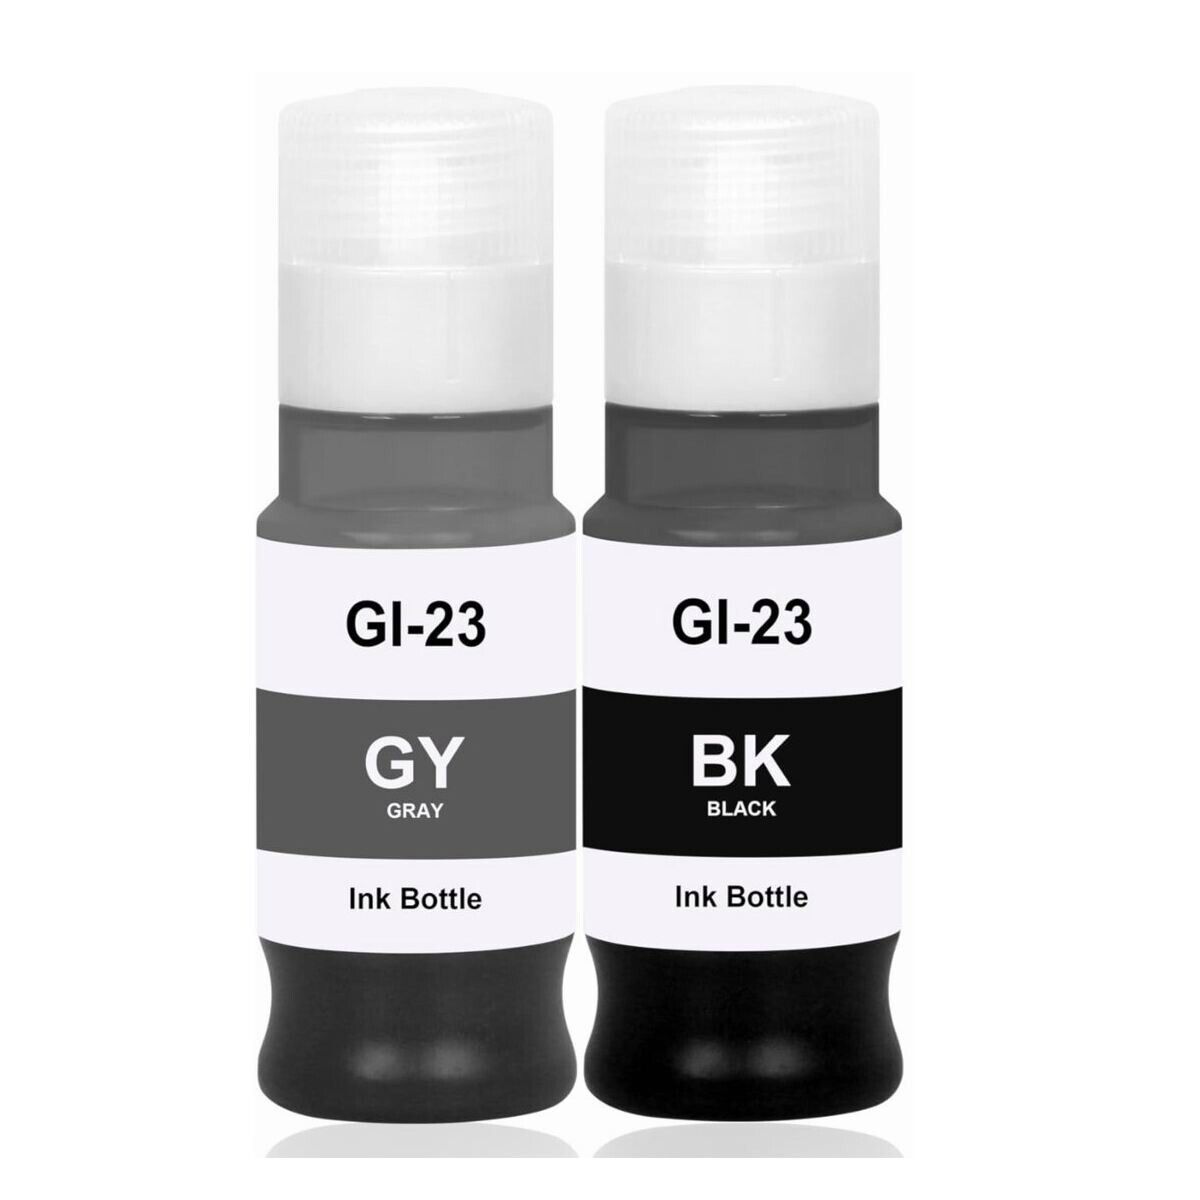 2pk GI-23 Black & Gray Compatible Ink Bottle Replacement for Canon GI-23 Refill